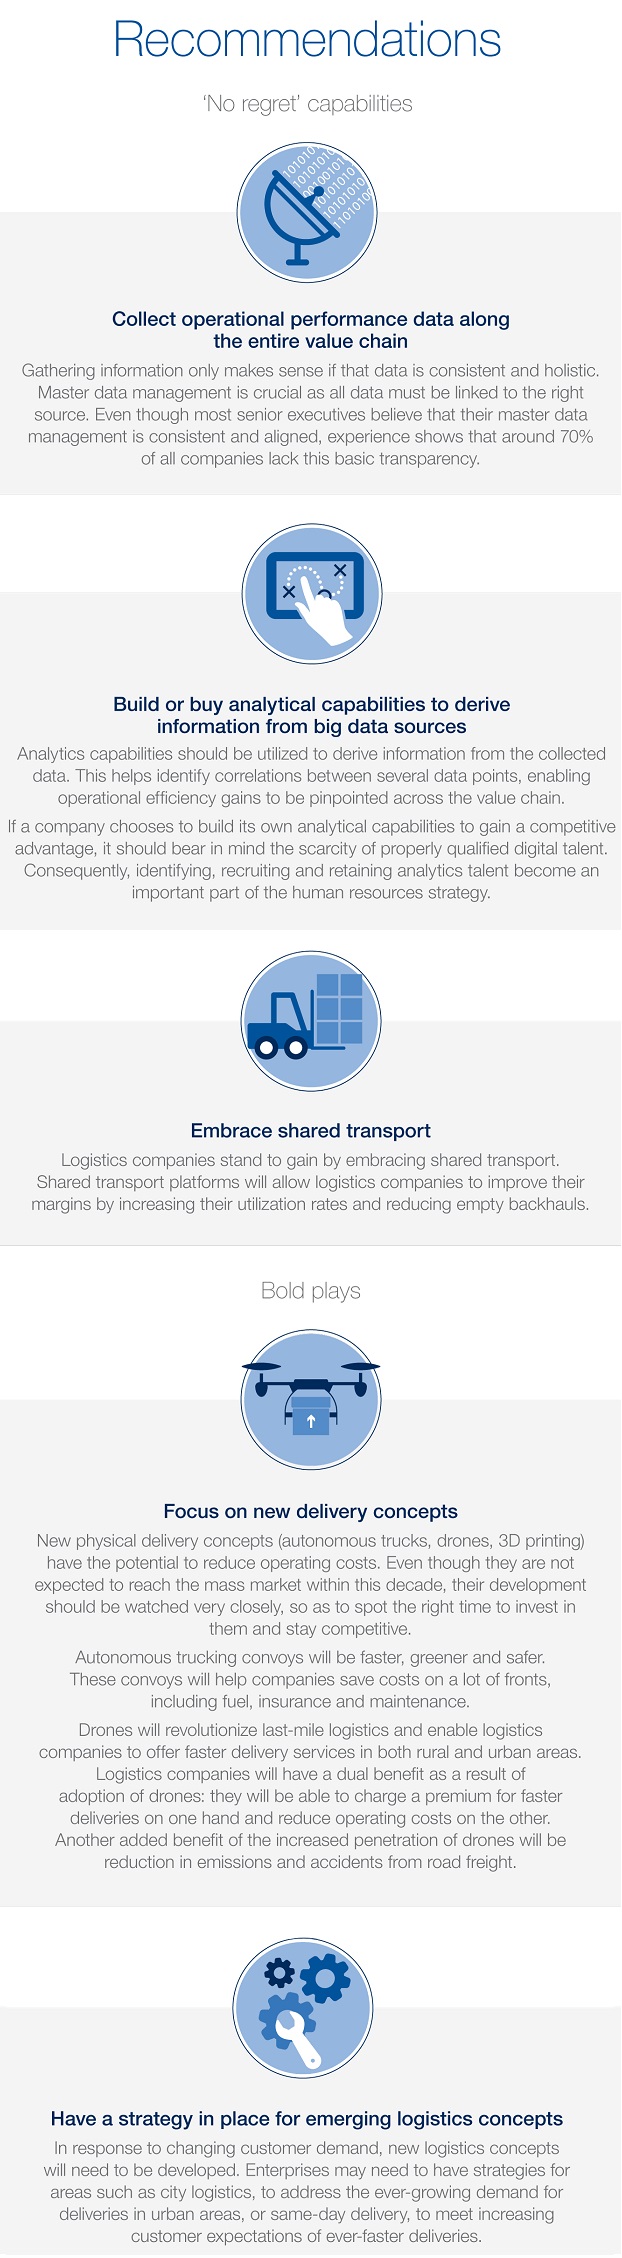 WEF Logistics Industry recommendations January 2016